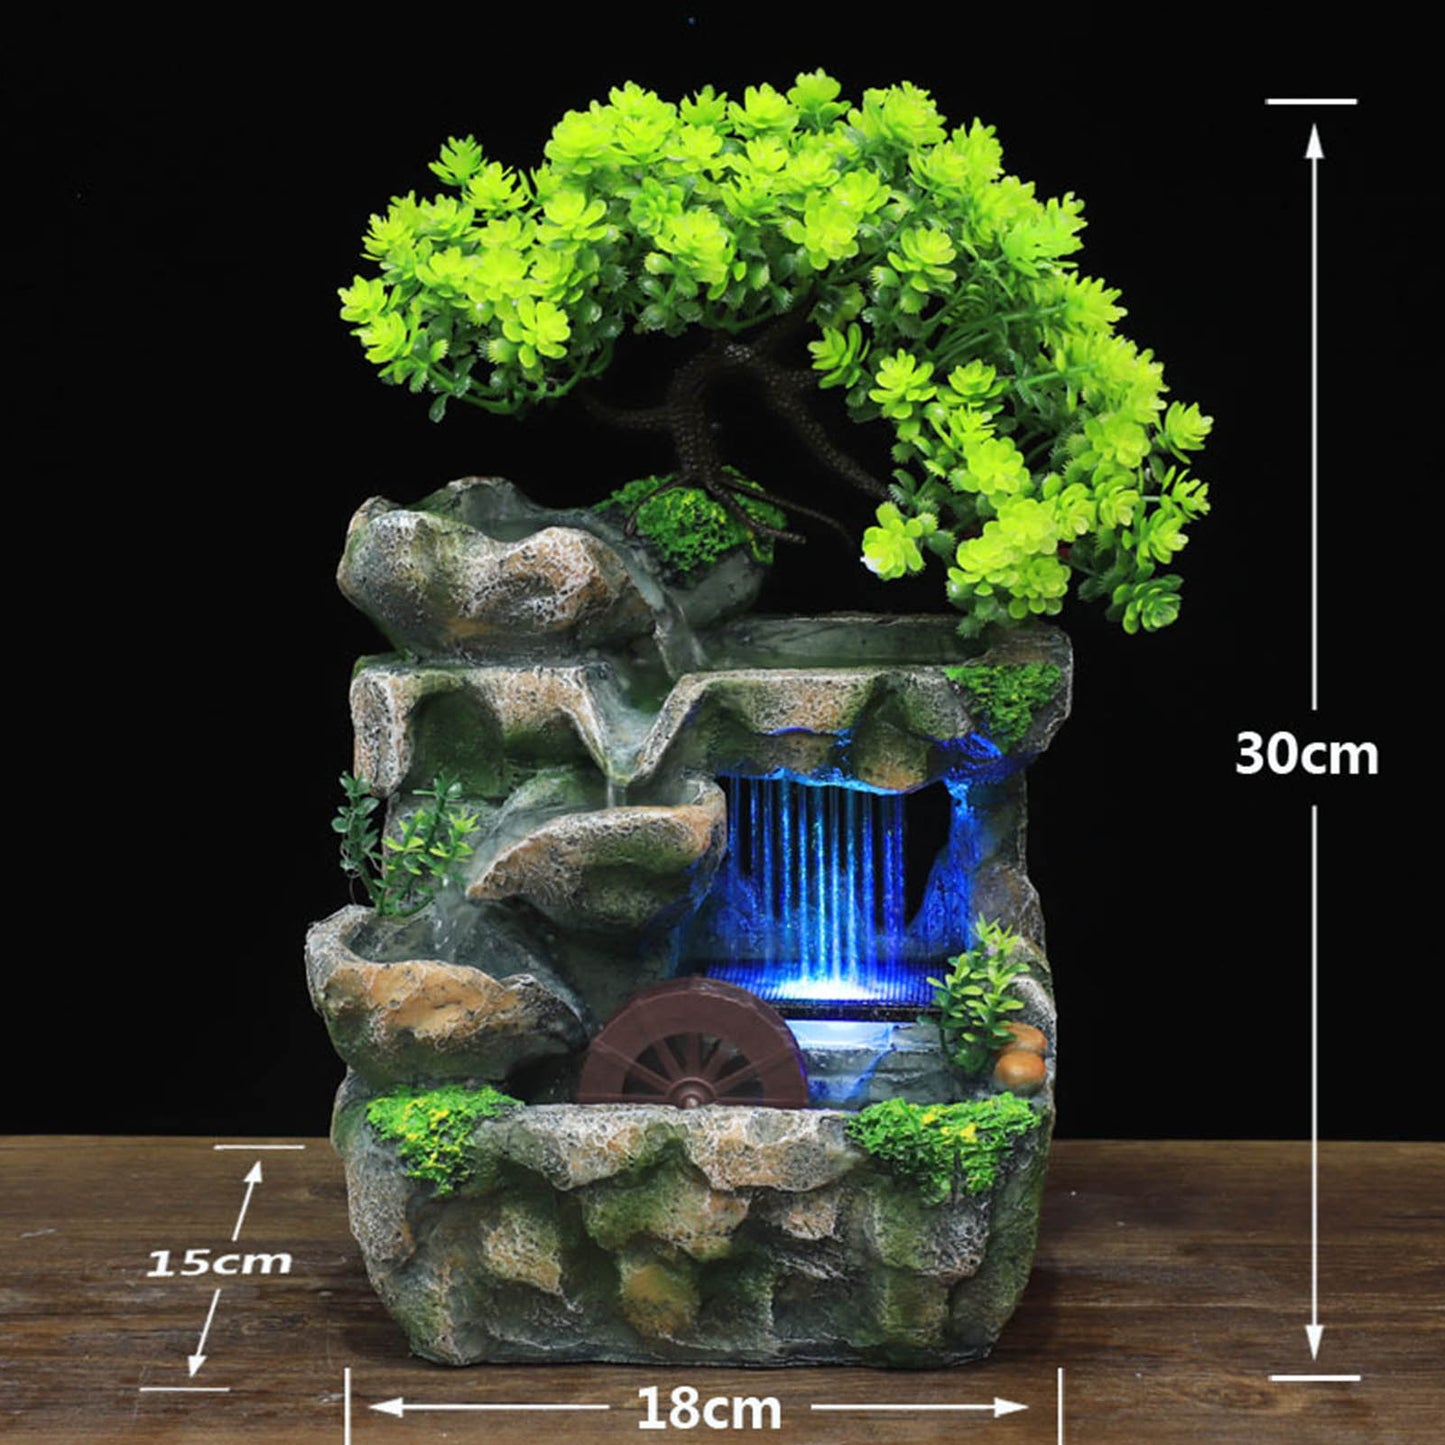 Elegant Decorative Water Fountains for Your Home, Office, or Garden